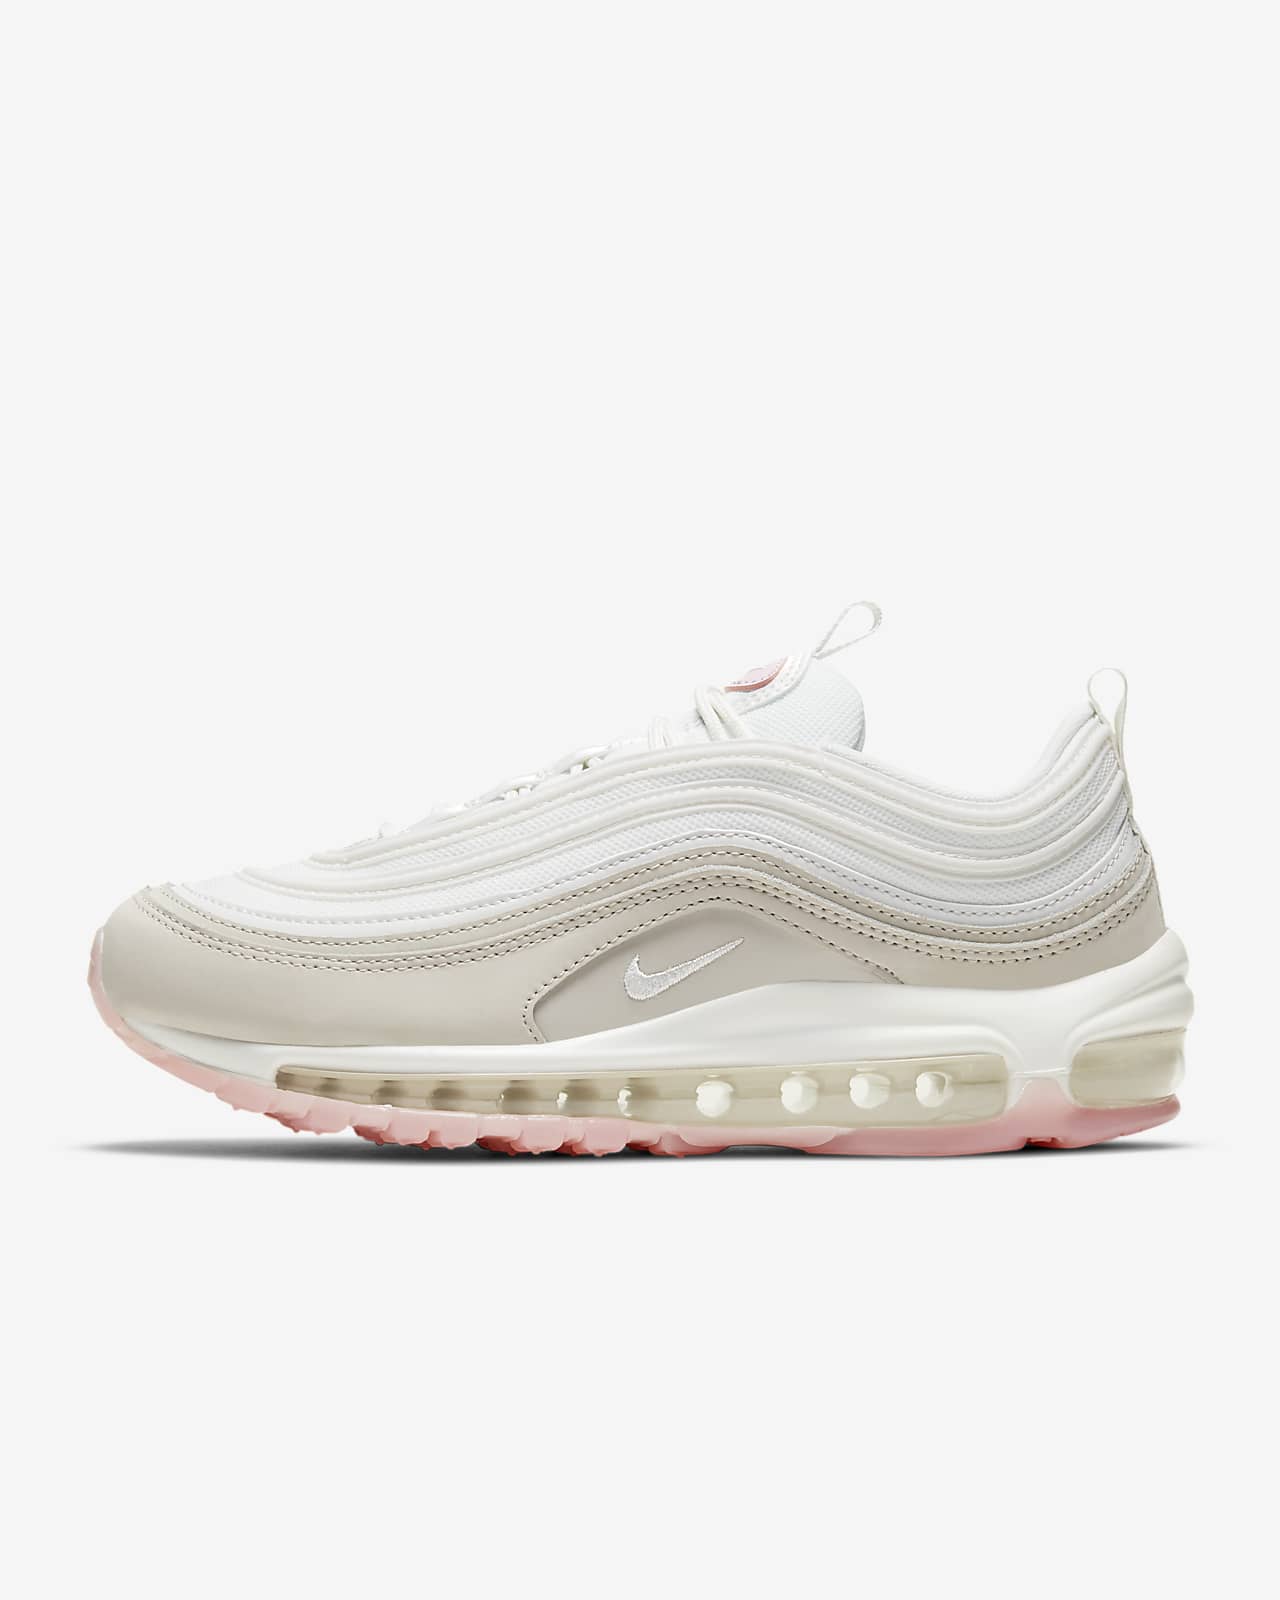 Air Max 97 Beige Best Sale, UP TO 50% OFF